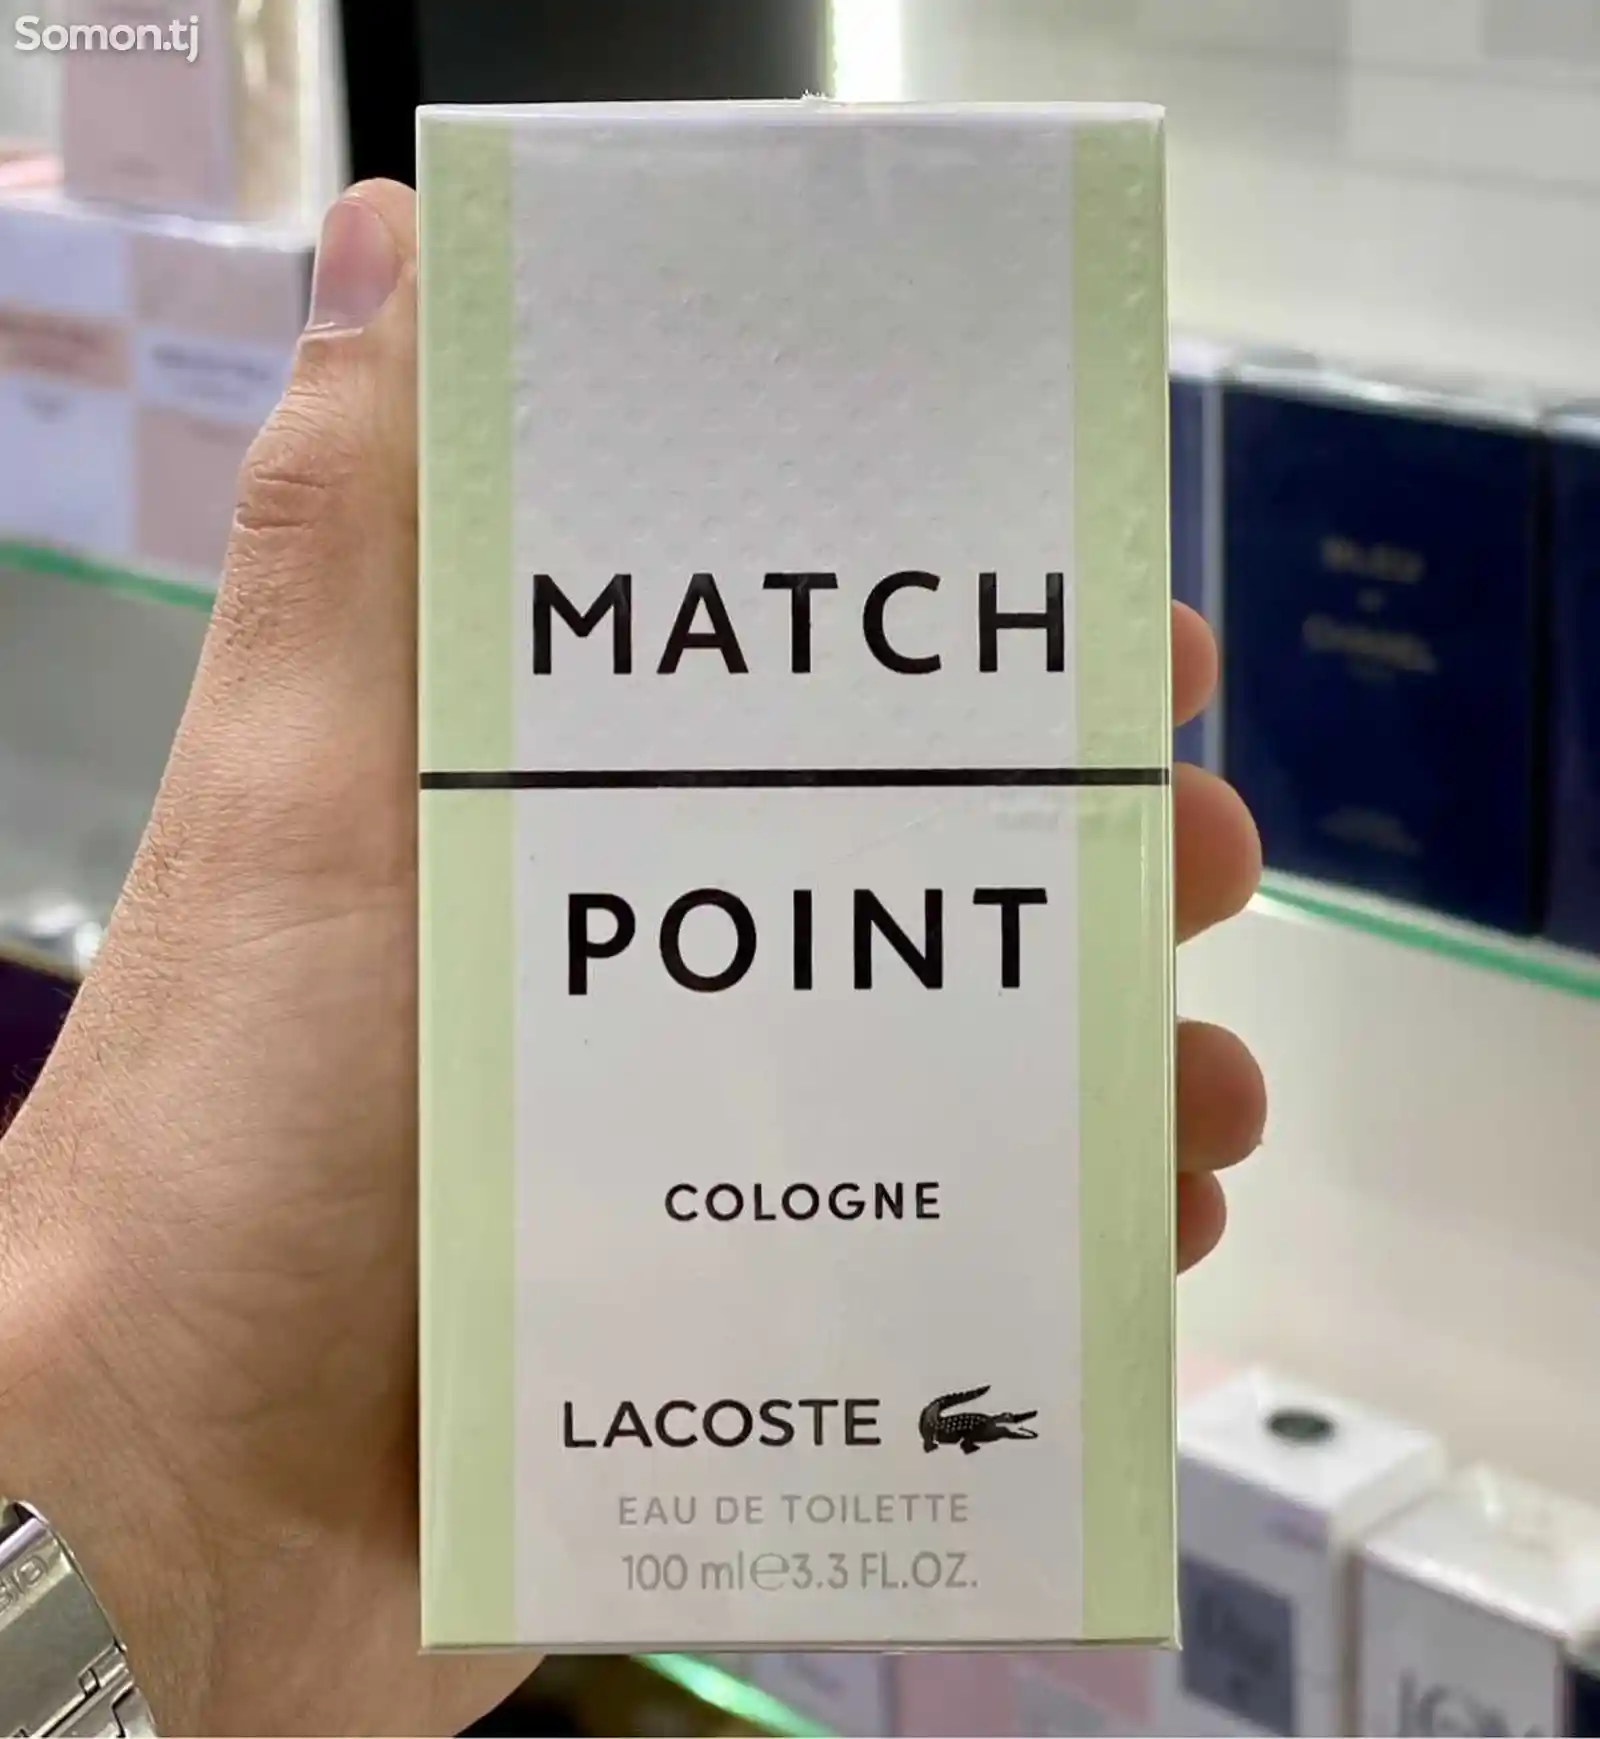 Парфюм Lacoste Match Point Cologne-1